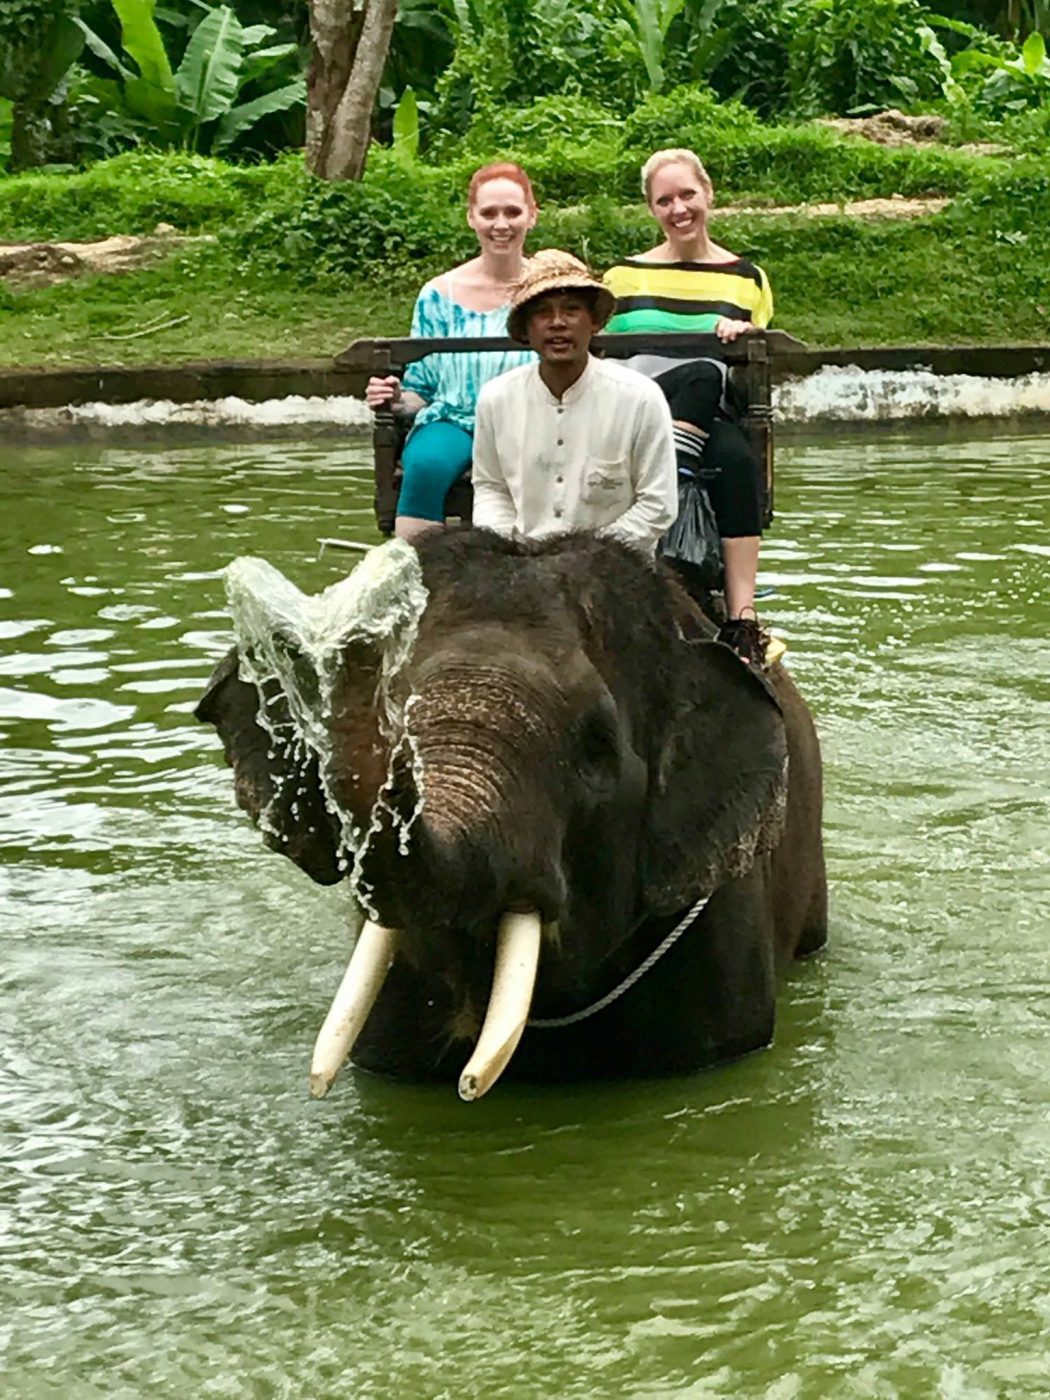 Bliss cultural package guests riding elephant